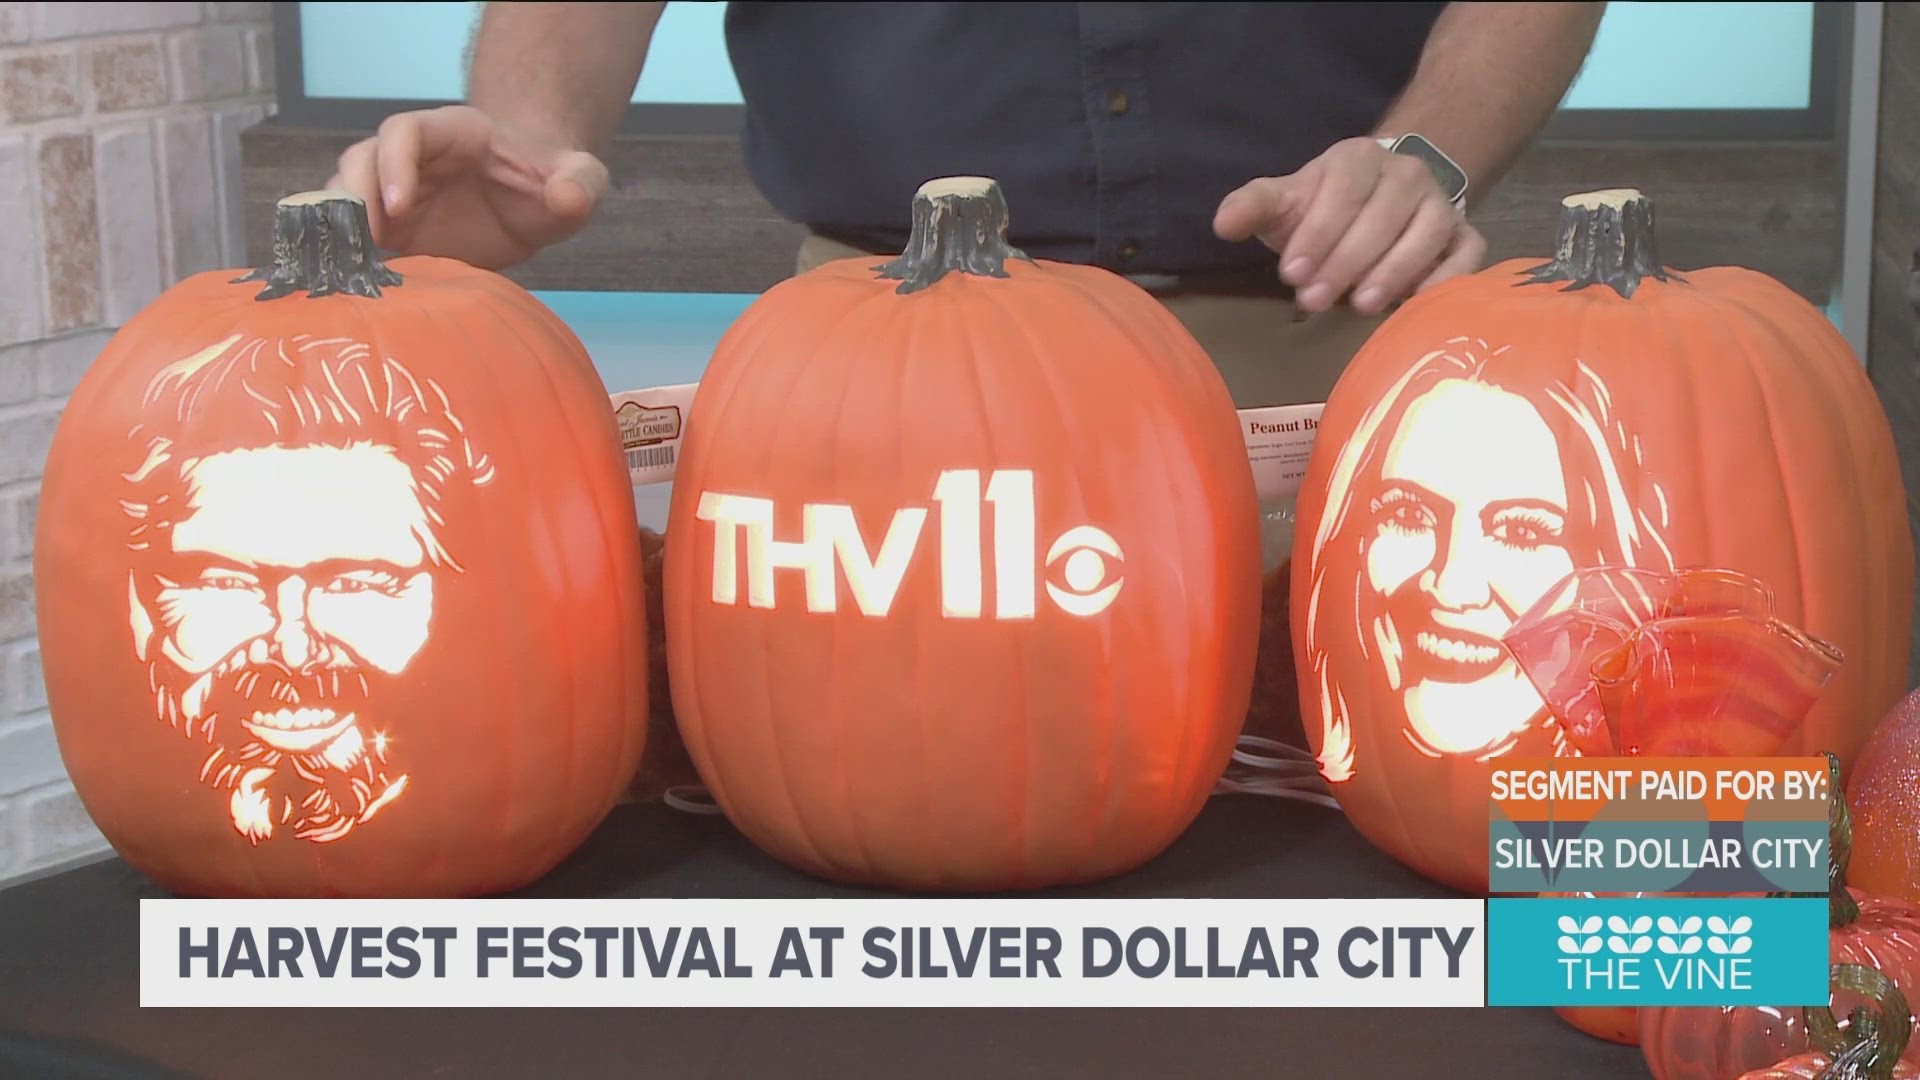 Dalton from Silver Dollar City tells us more about the Harvest Festival at Silver Dollar City.